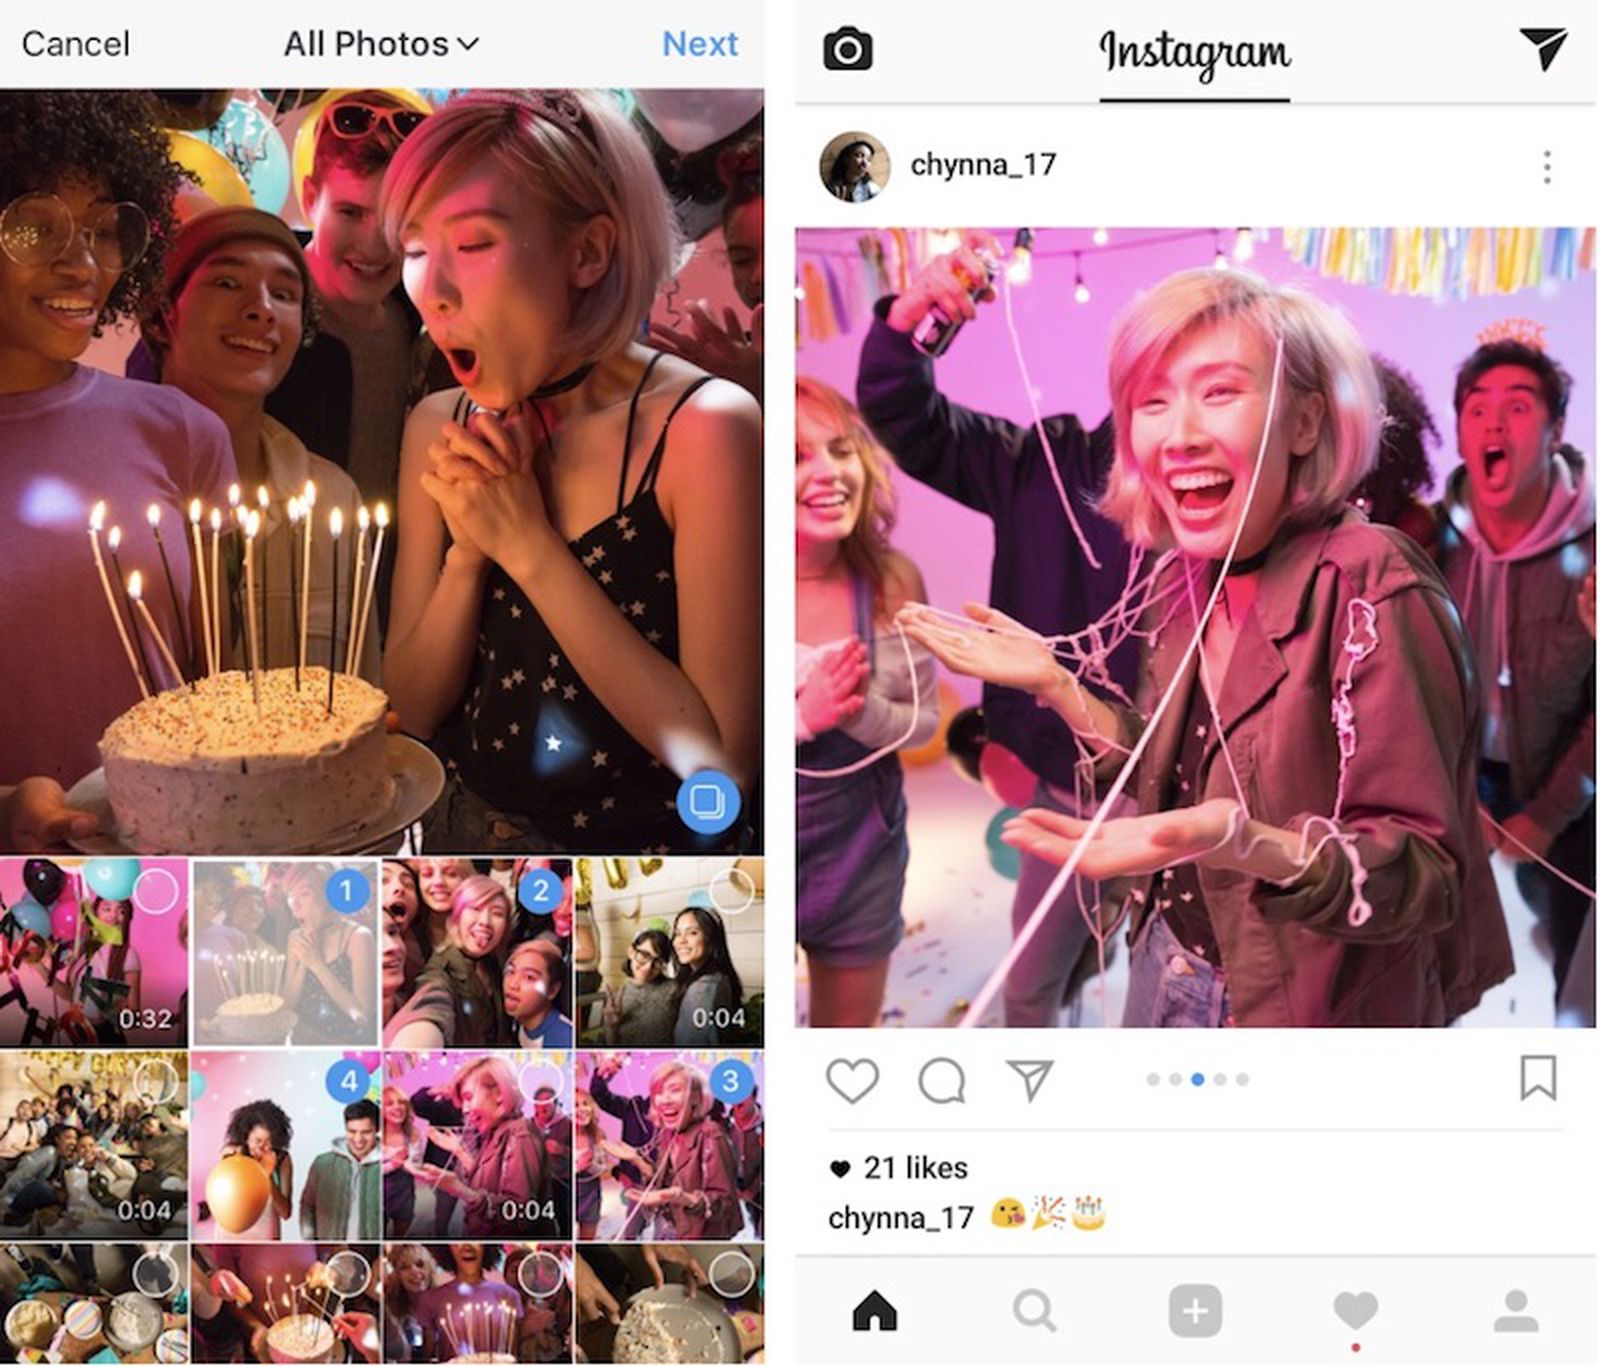 Instagram today announced that users will now be able to share multiple pho...